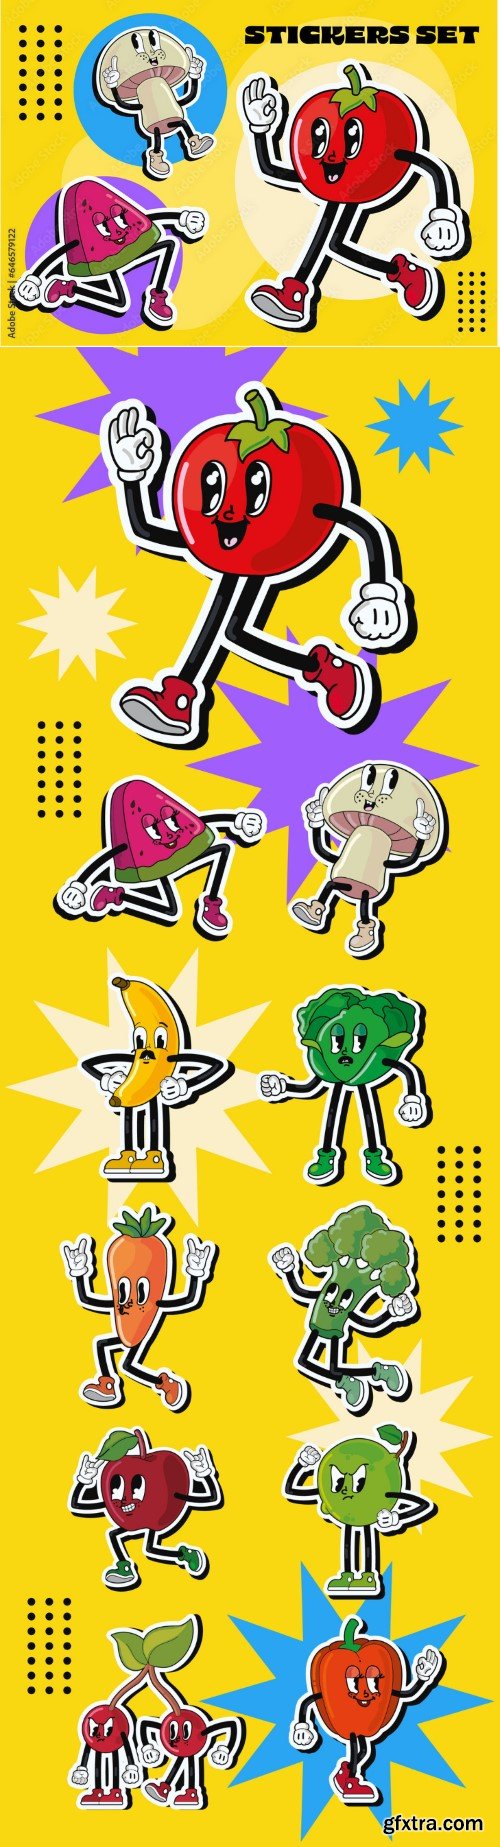 Vegetables and Fruits Cartoon Characters Sticker Set